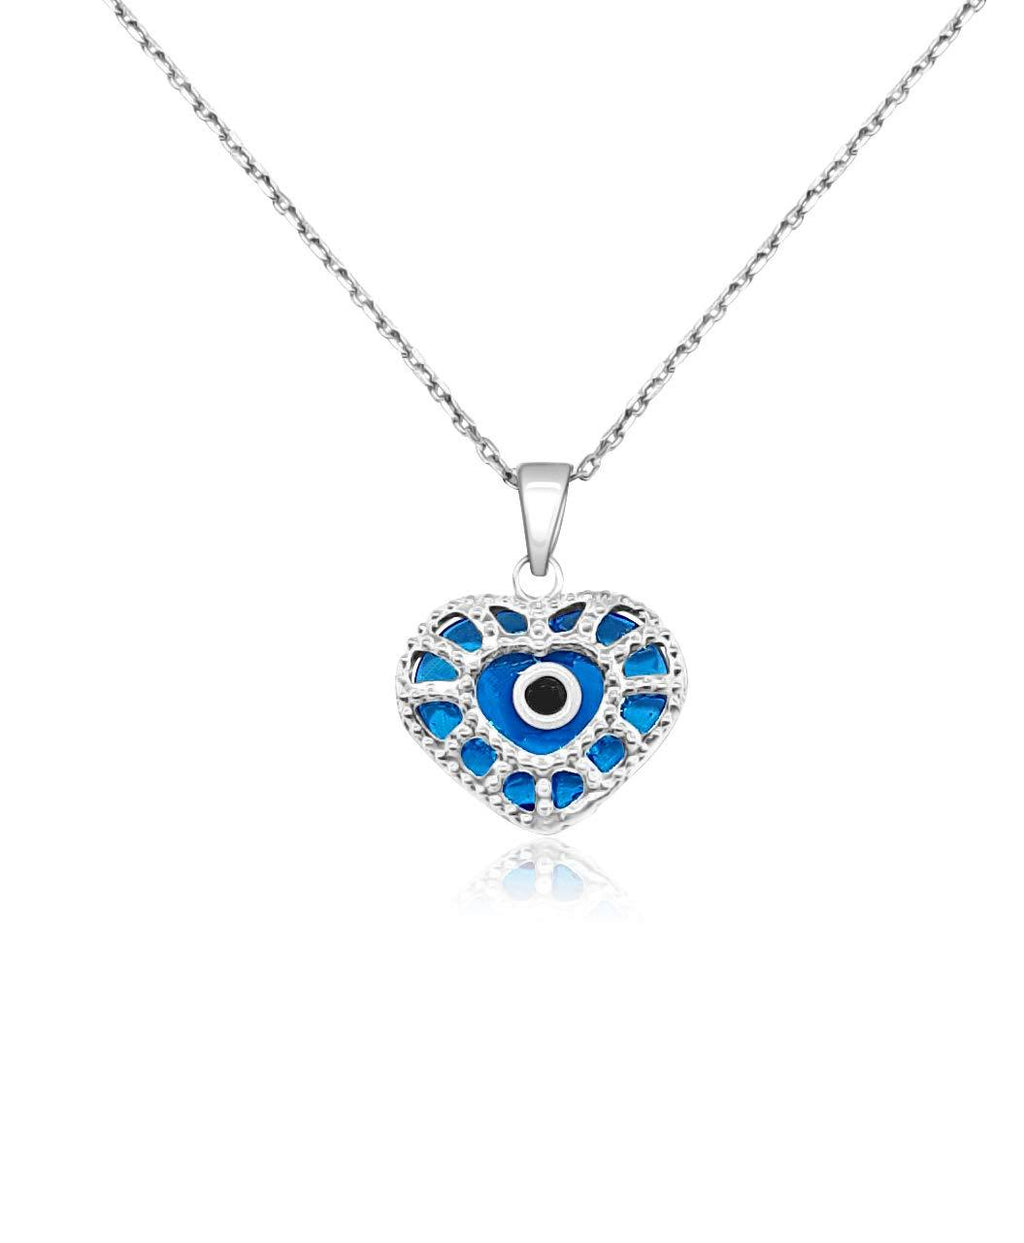 [Australia] - MYSTIC JEWELS By Dalia - 925 Sterling Silver Pendant with Glass Evil Eye and Adjustable Chain Necklace Heart 